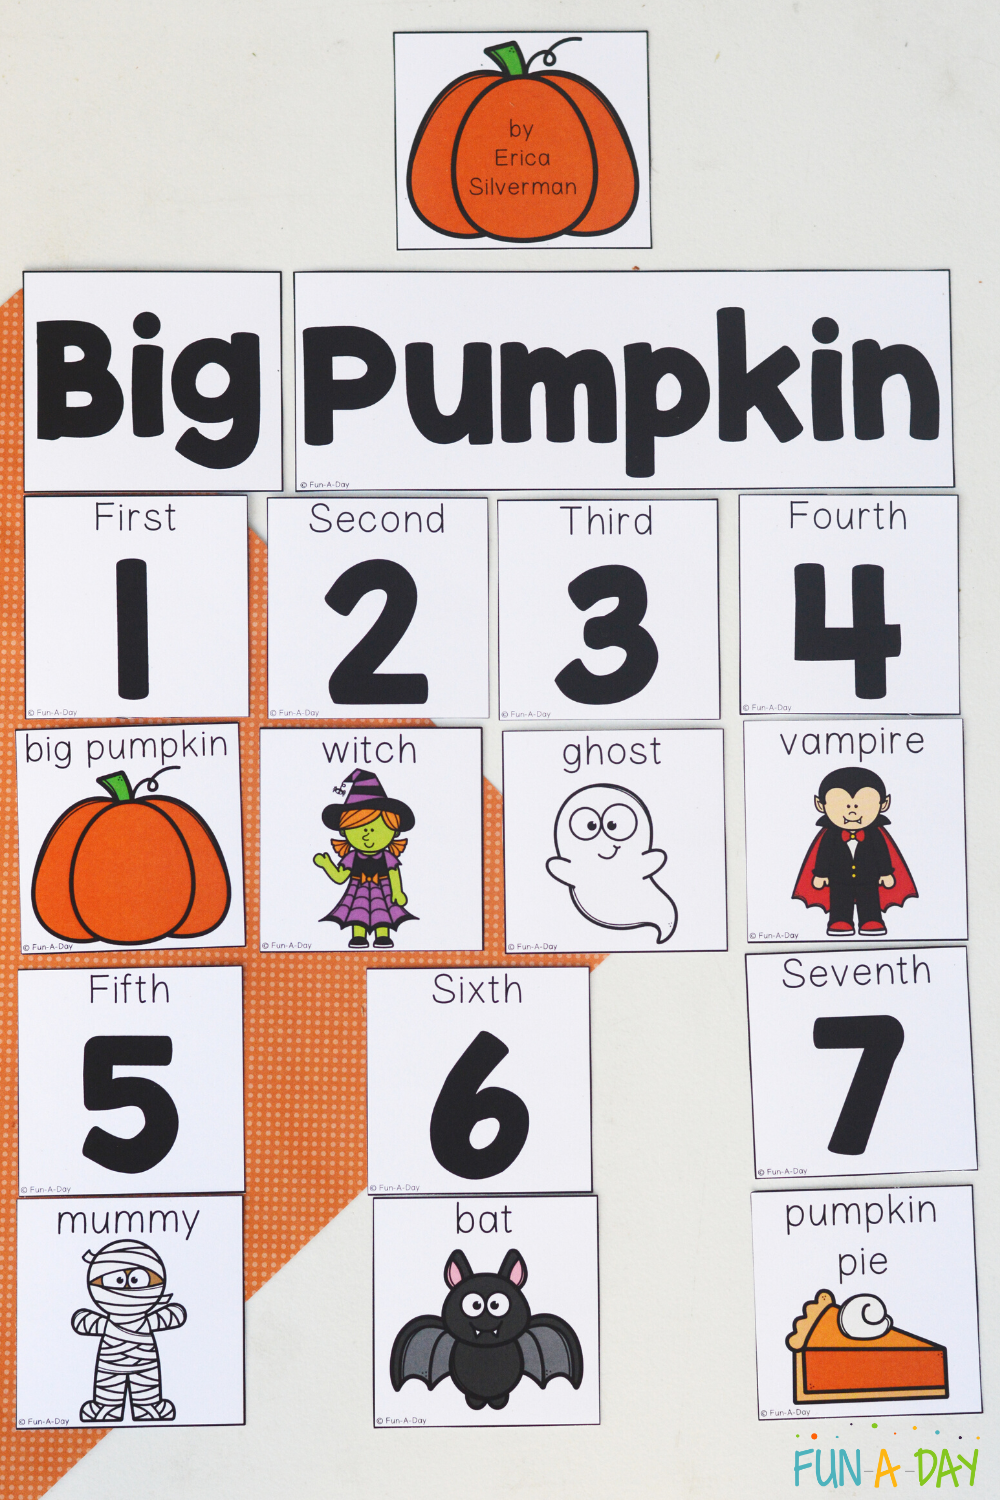 View of the Big Pumpkin sequencing printable in use